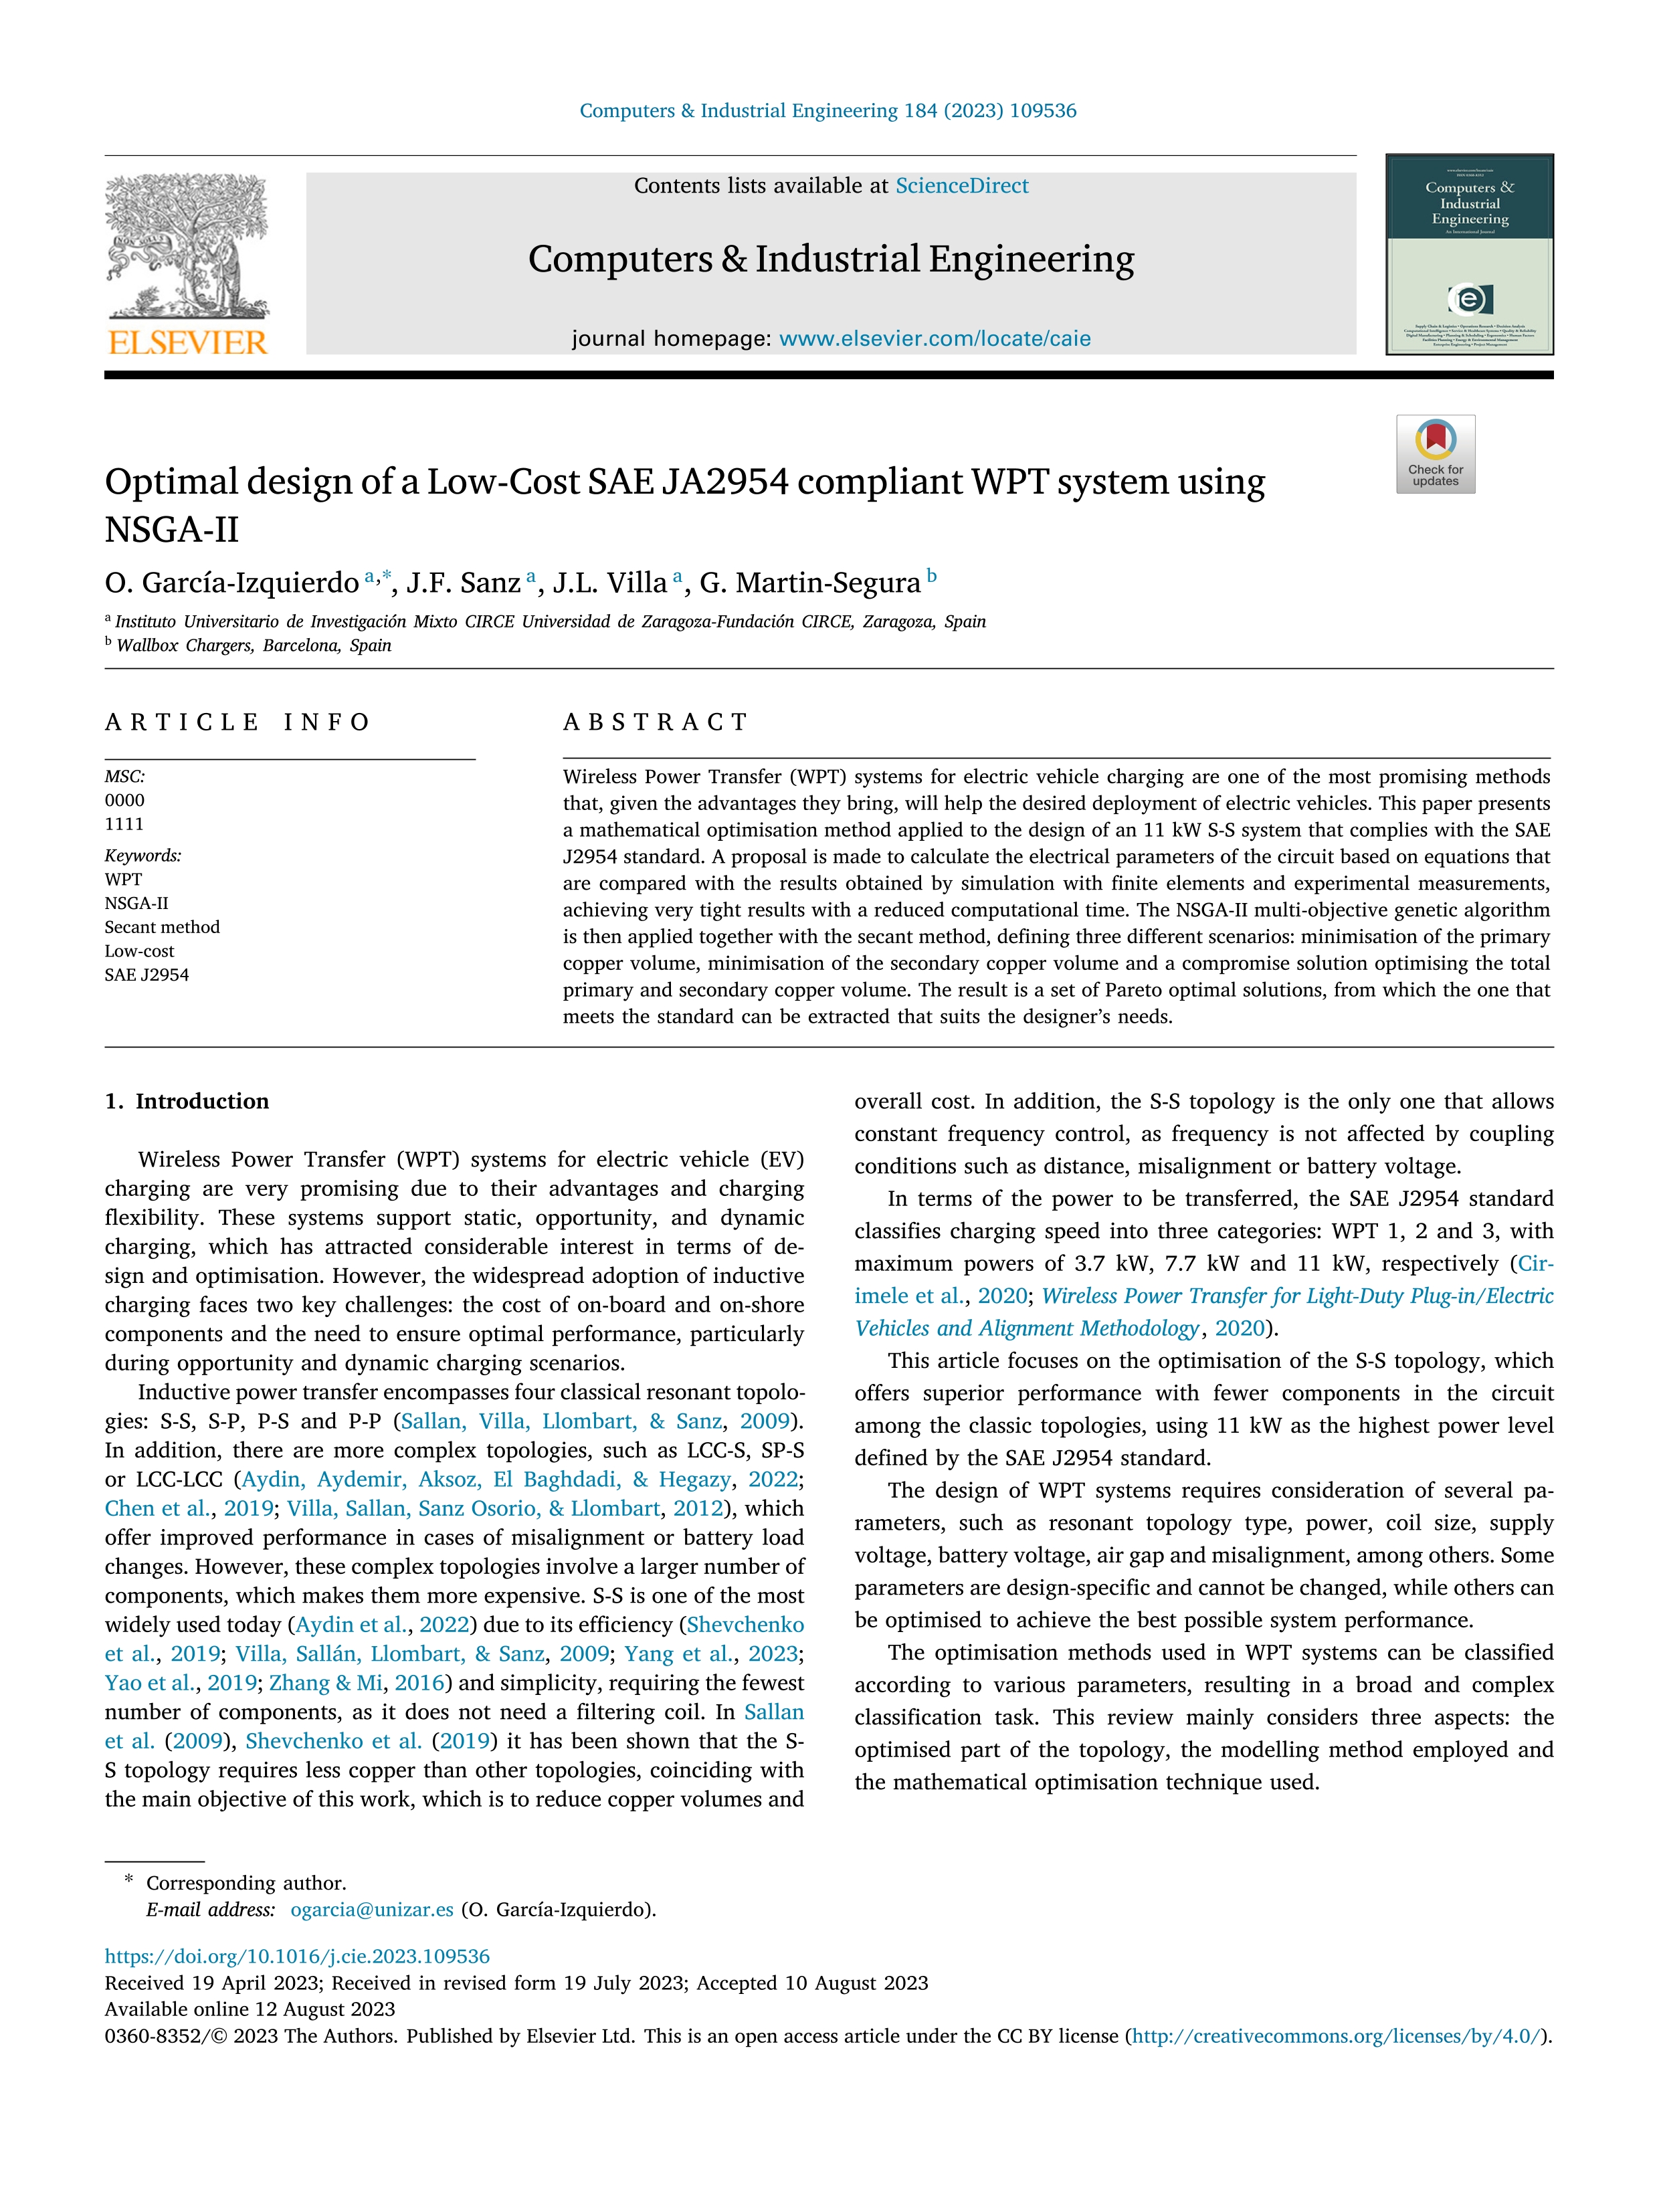 Optimal design of a Low-Cost SAE JA2954 compliant WPT system using NSGA-II